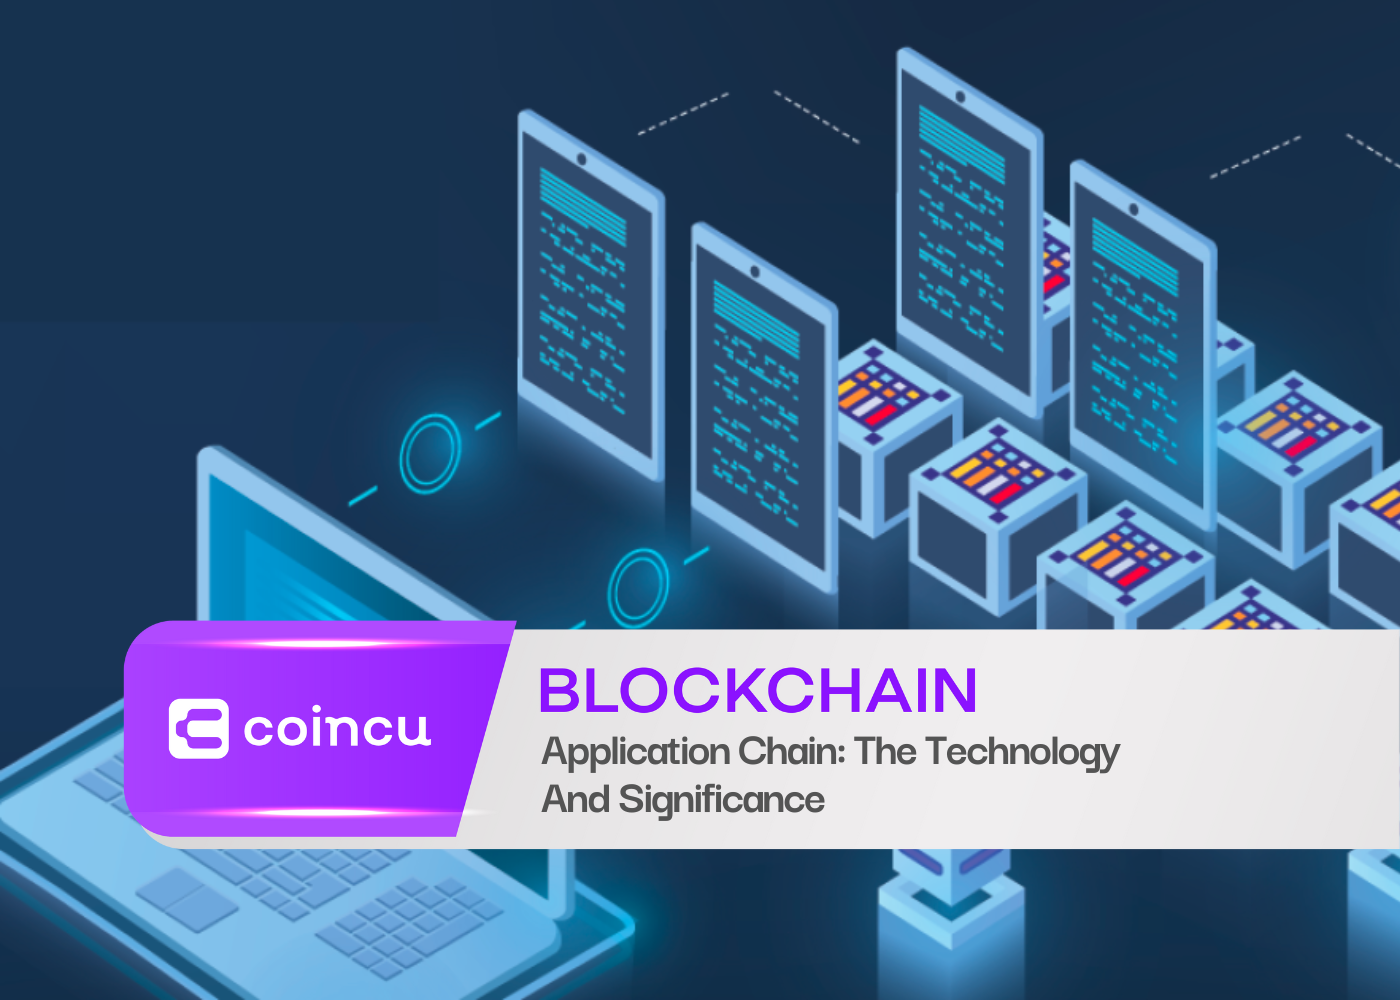 Application Chain: The Technology And Significance